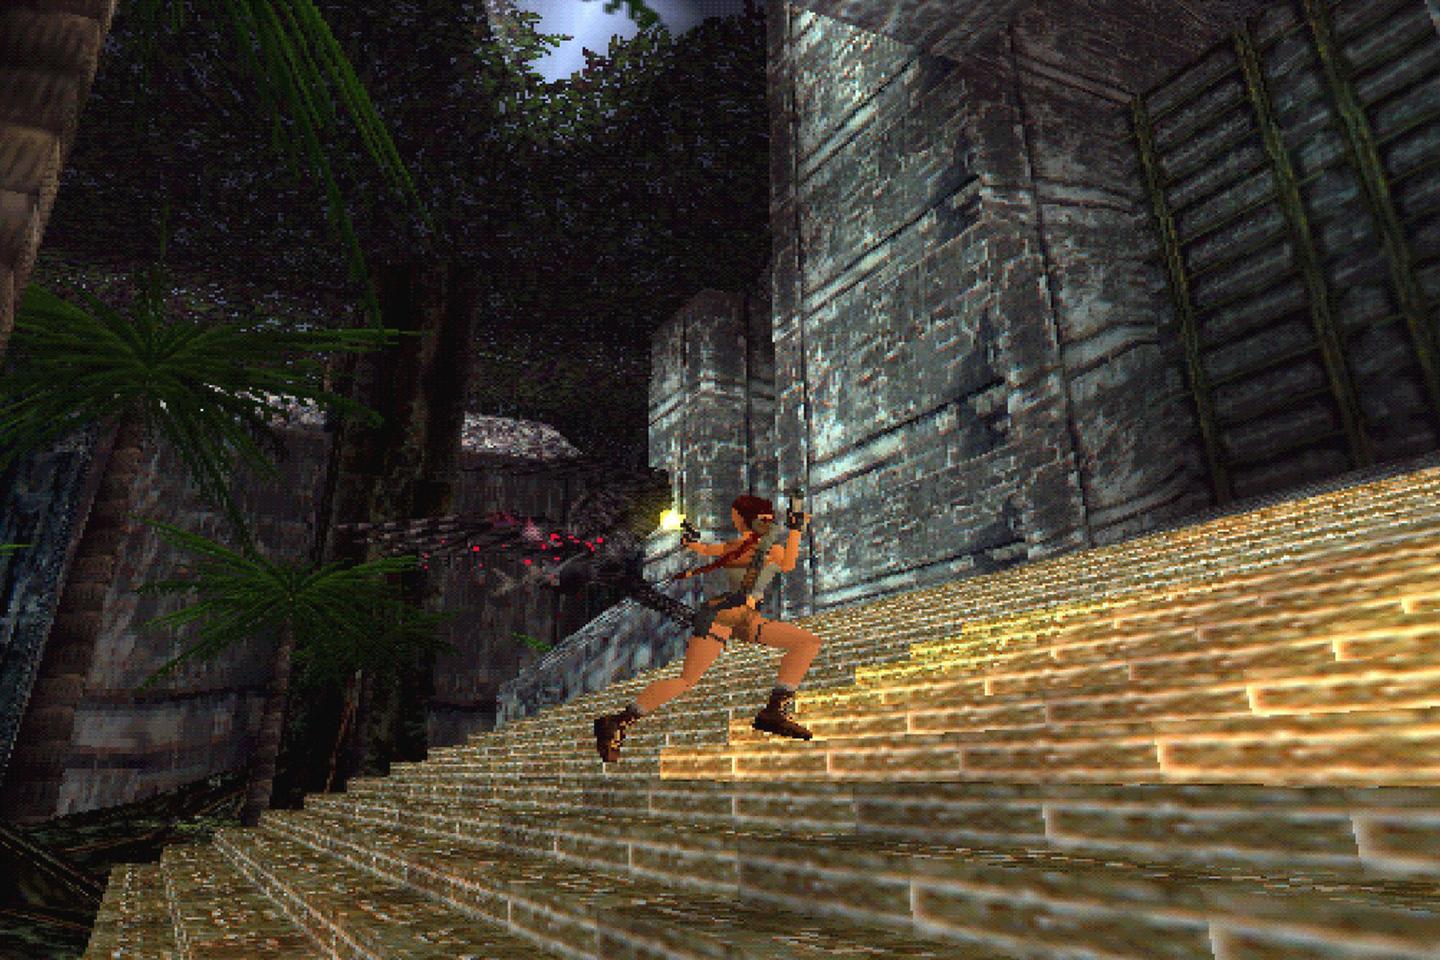 An action shot of Lara in an orange top and brown shorts running up a stone staircase in a jungle setting with ancient ruins and pink flowering plants.